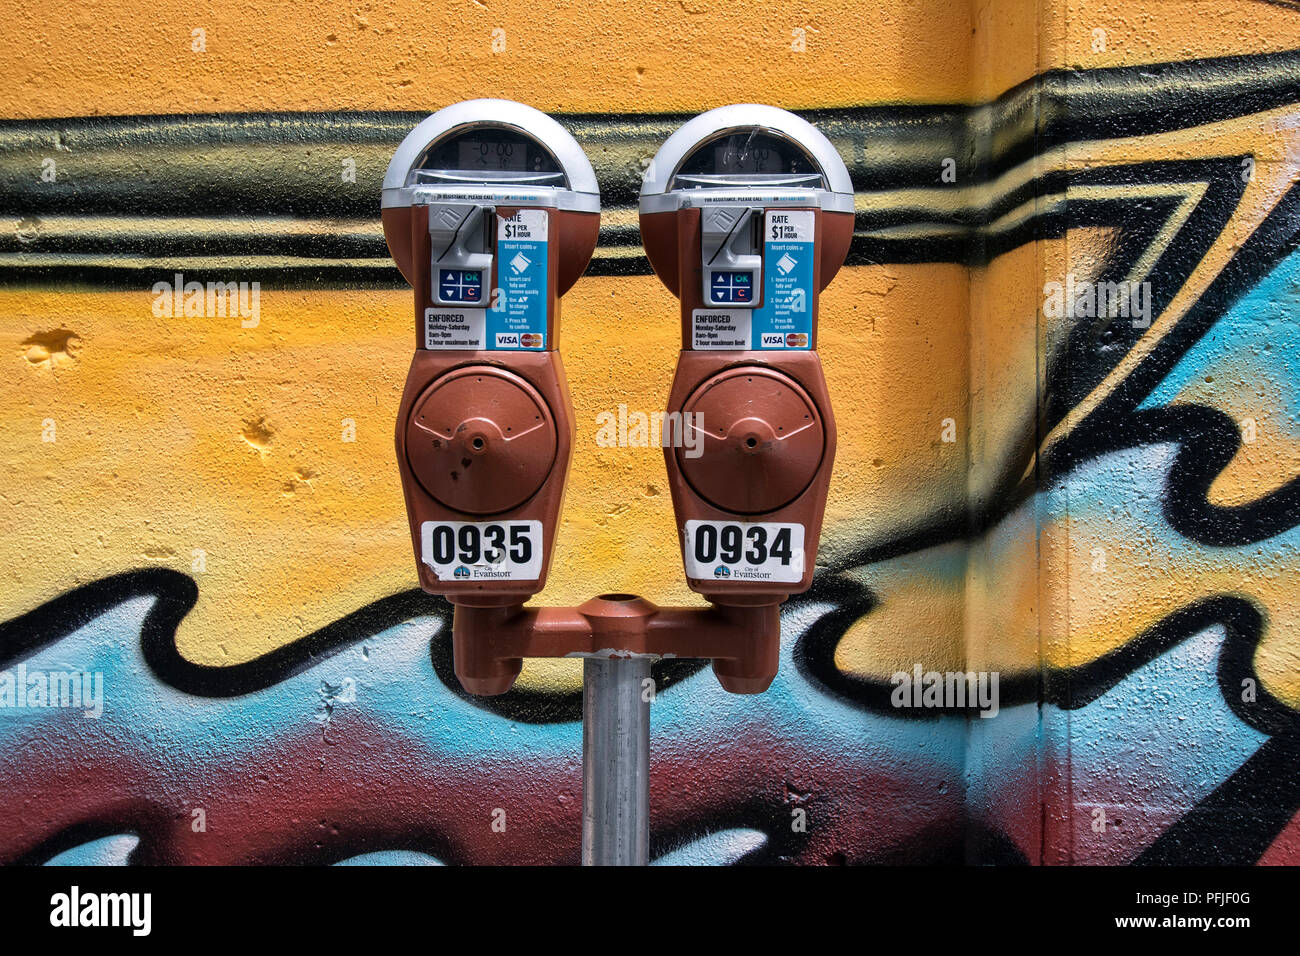 Parking meter in front of a colorful wall painting in Evanston, Illinois, USA. Stock Photo